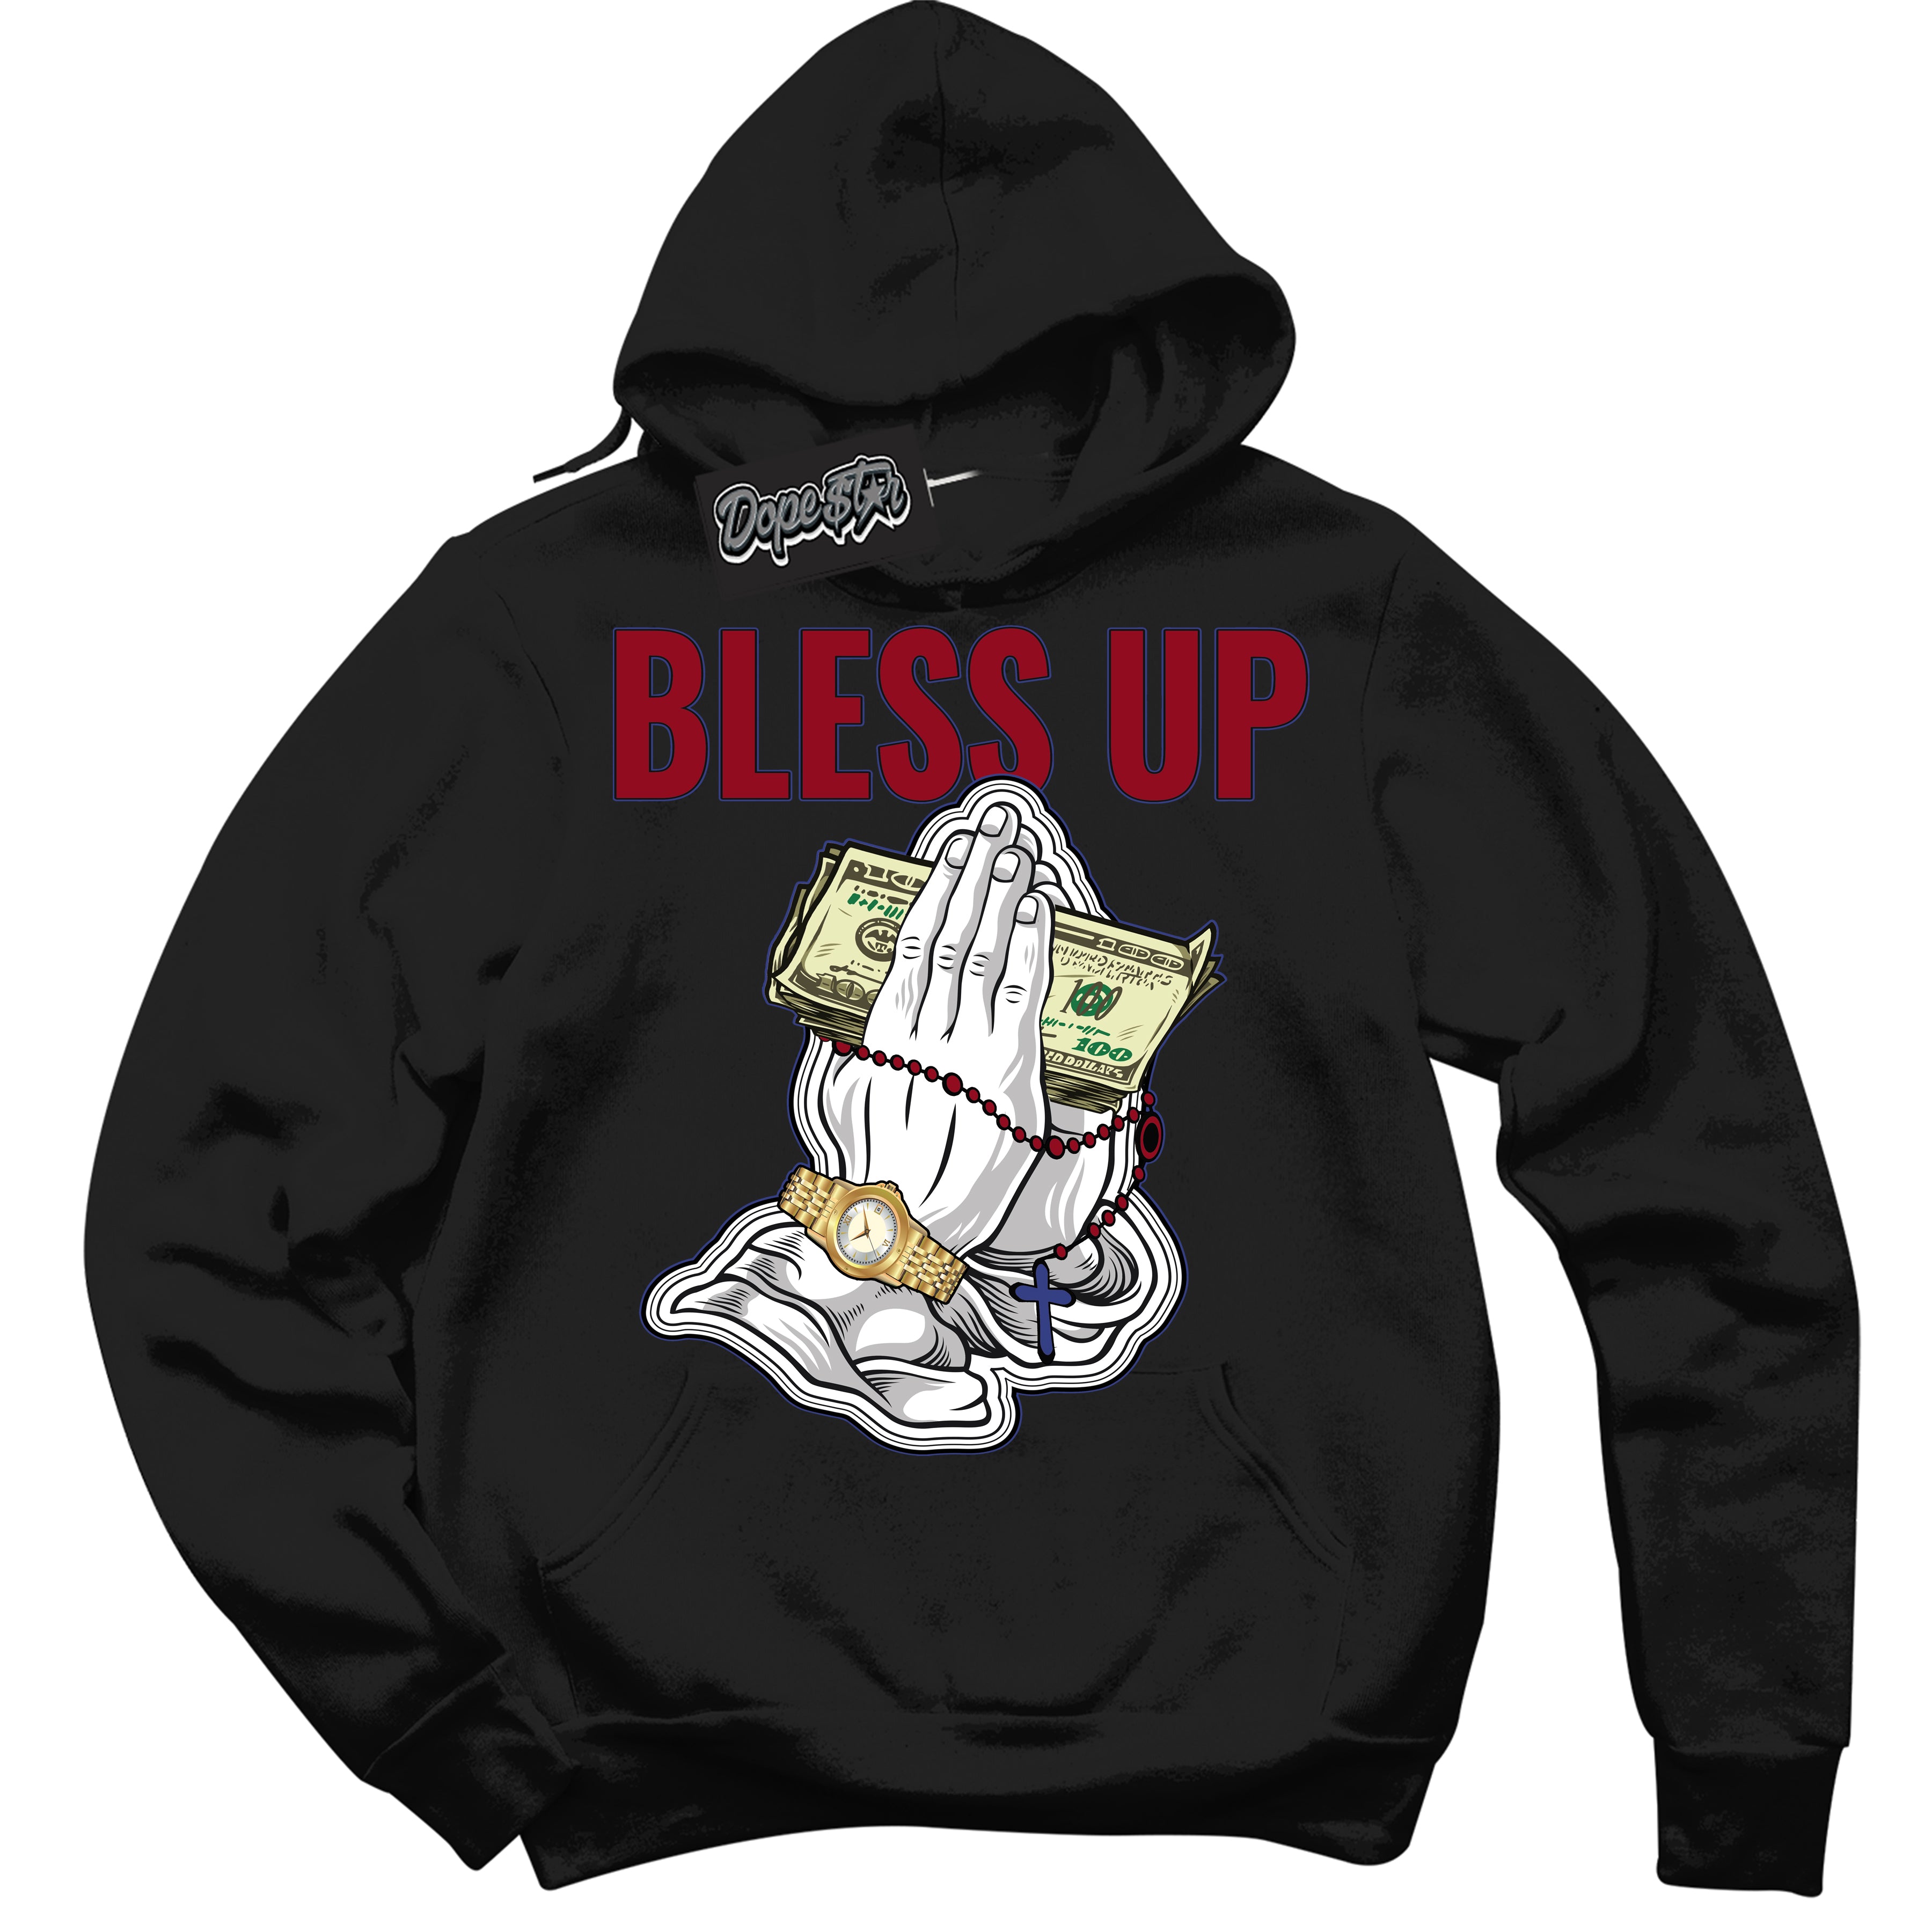 Cool Black Hoodie with “ Bless Up ”  design that Perfectly Matches Playoffs 8s Sneakers.